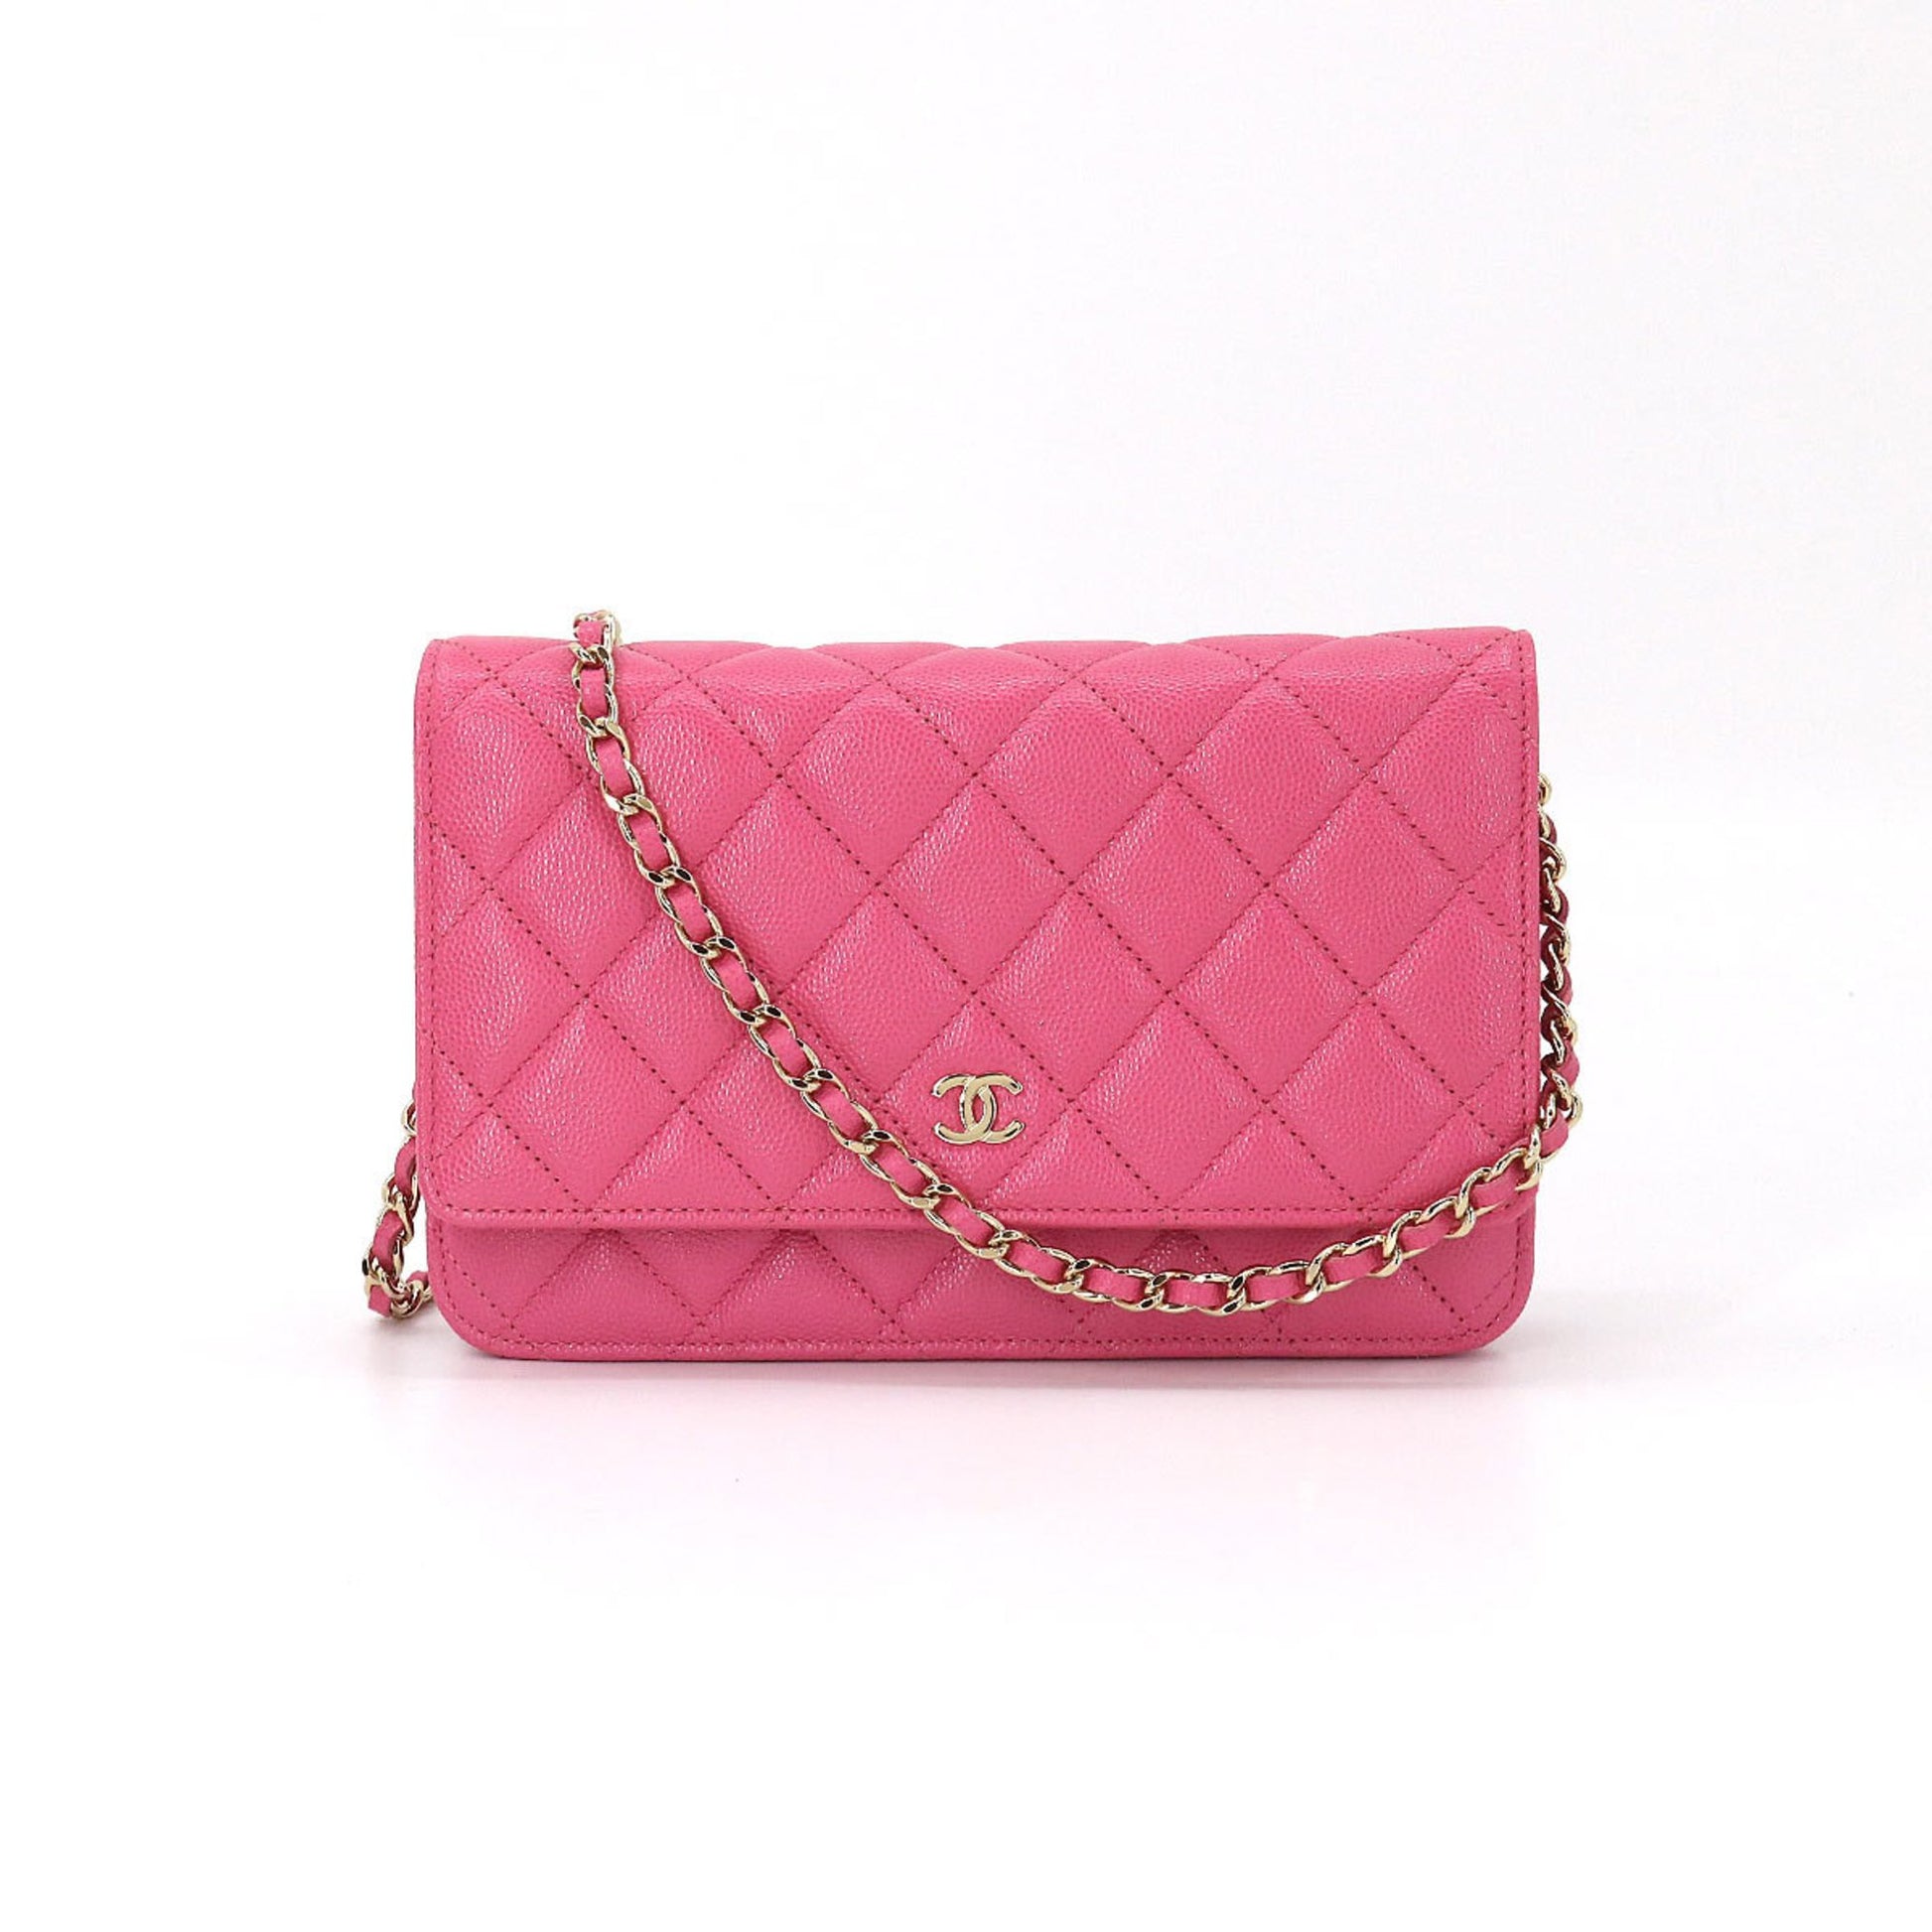 Chanel Rare Runway Quilted Classic Flap Bag Patent Hot Pink Fuschia Clutch